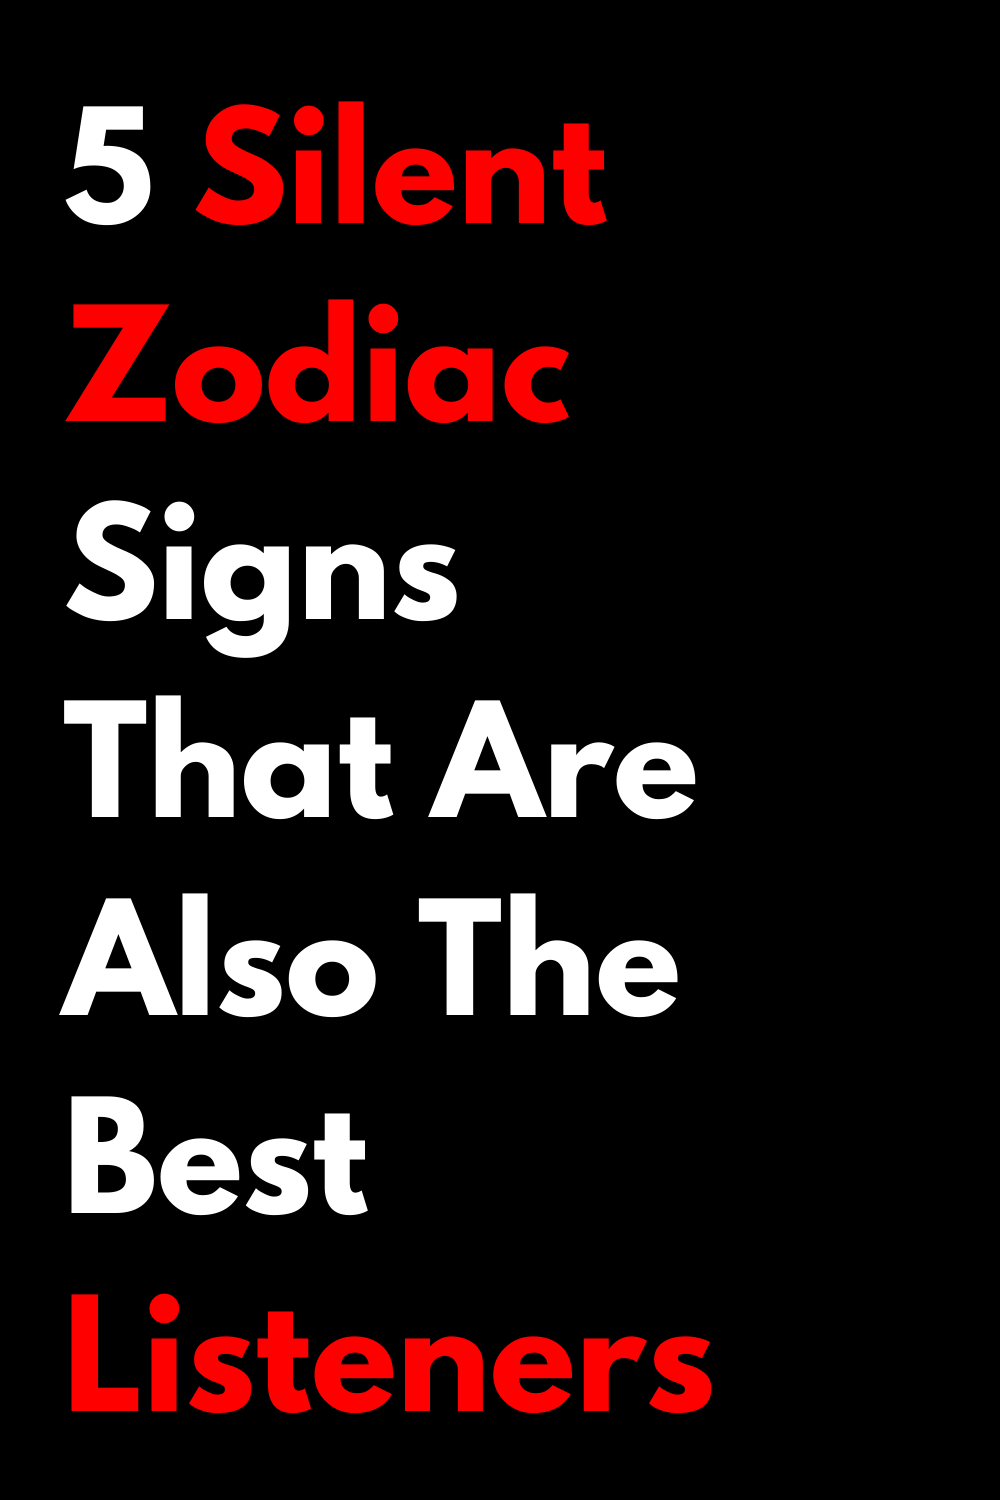 5 Silent Zodiac Signs That Are Also The Best Listeners